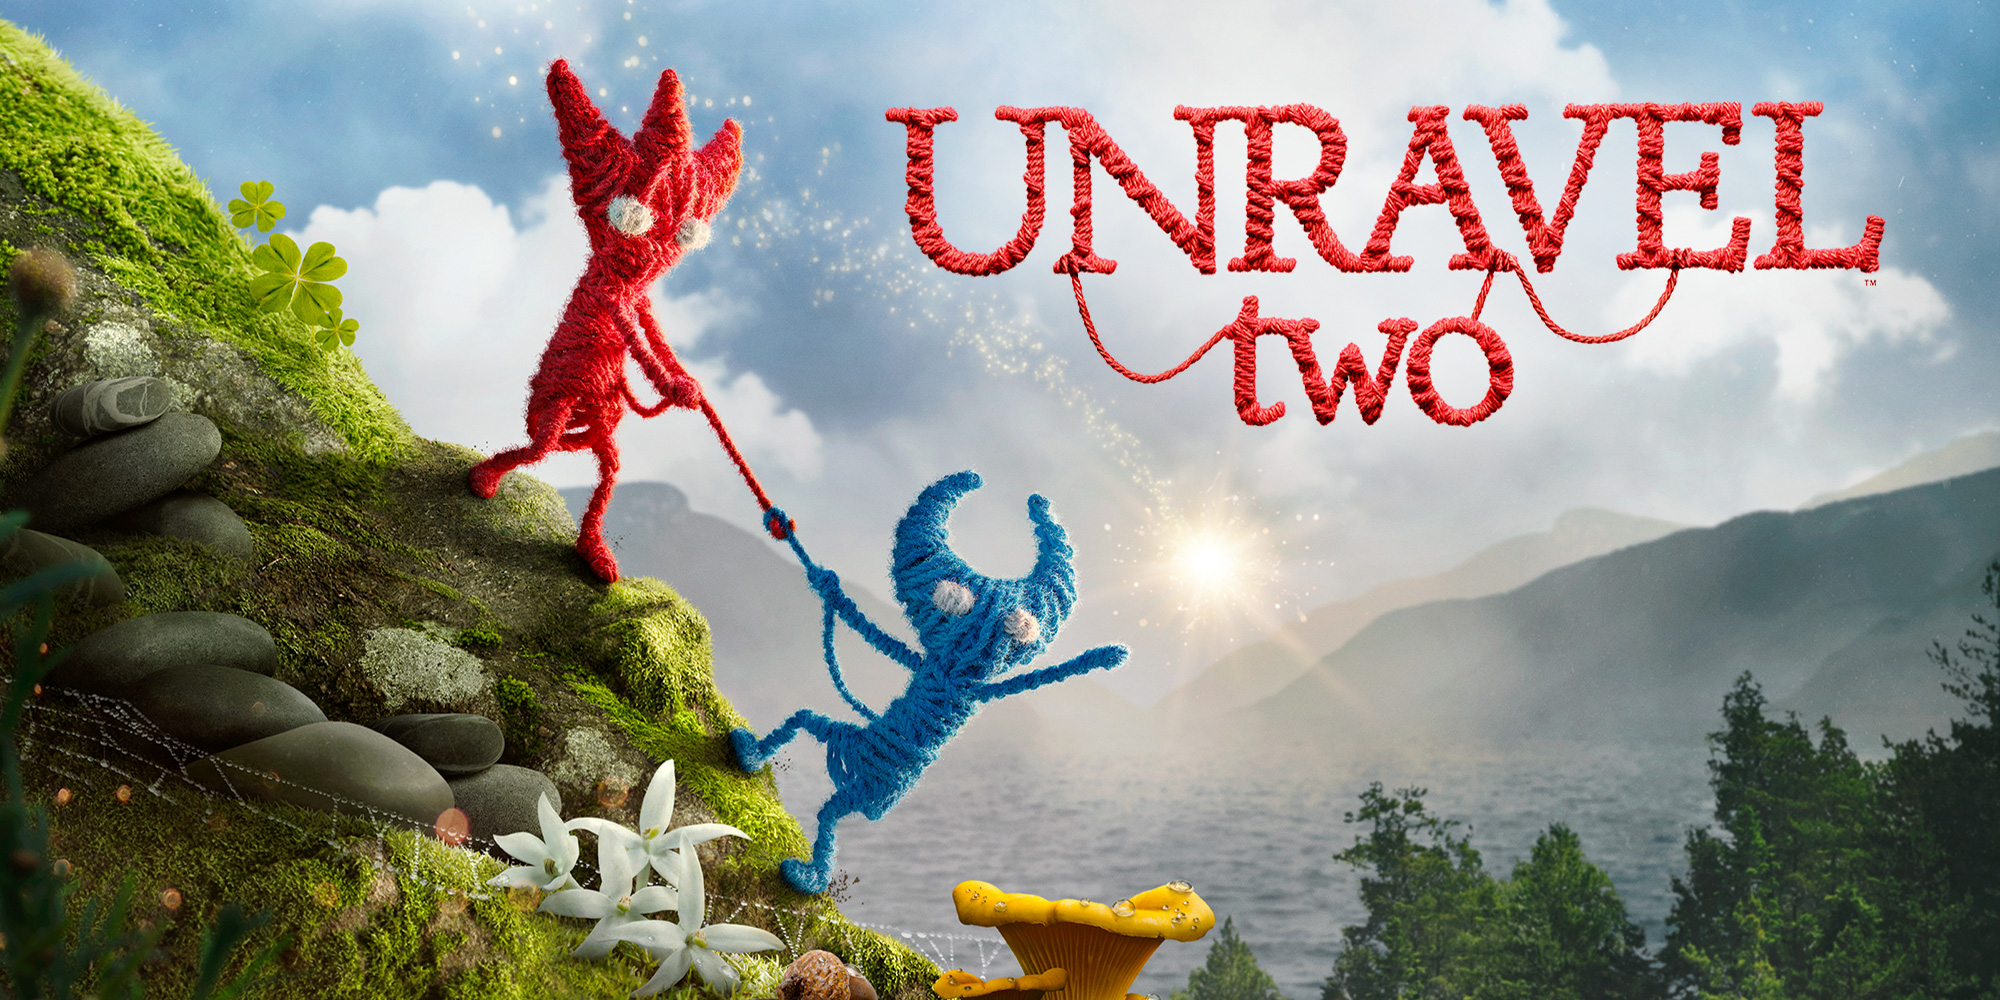 Check Out 22 Minutes Of Handheld And Co-Op Gameplay In Unravel Two